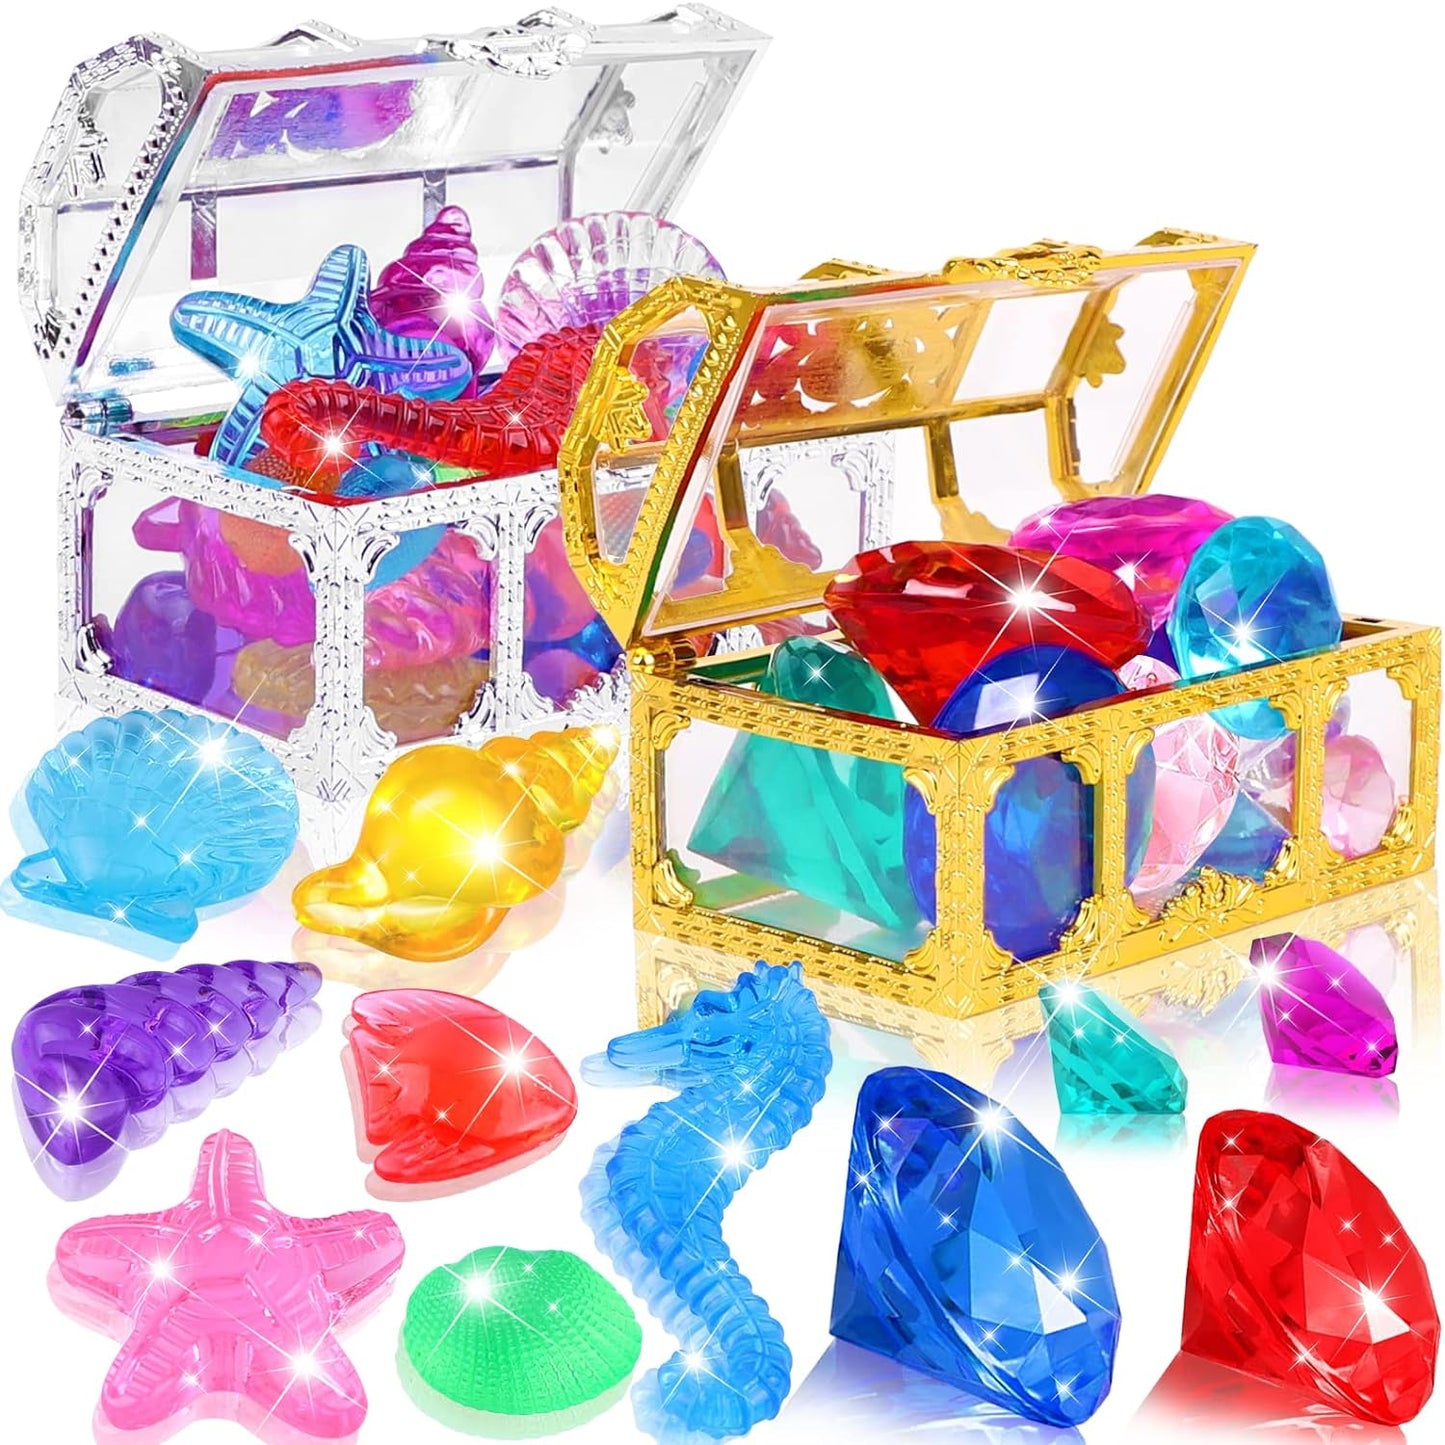 Diving Gem Pool Toys 10 Colorful Big Diamond Gem with Treasure Pirate Chest Box Summer Underwater Acrylic Gemstones Set for Kids Swimming Pool Party Favors